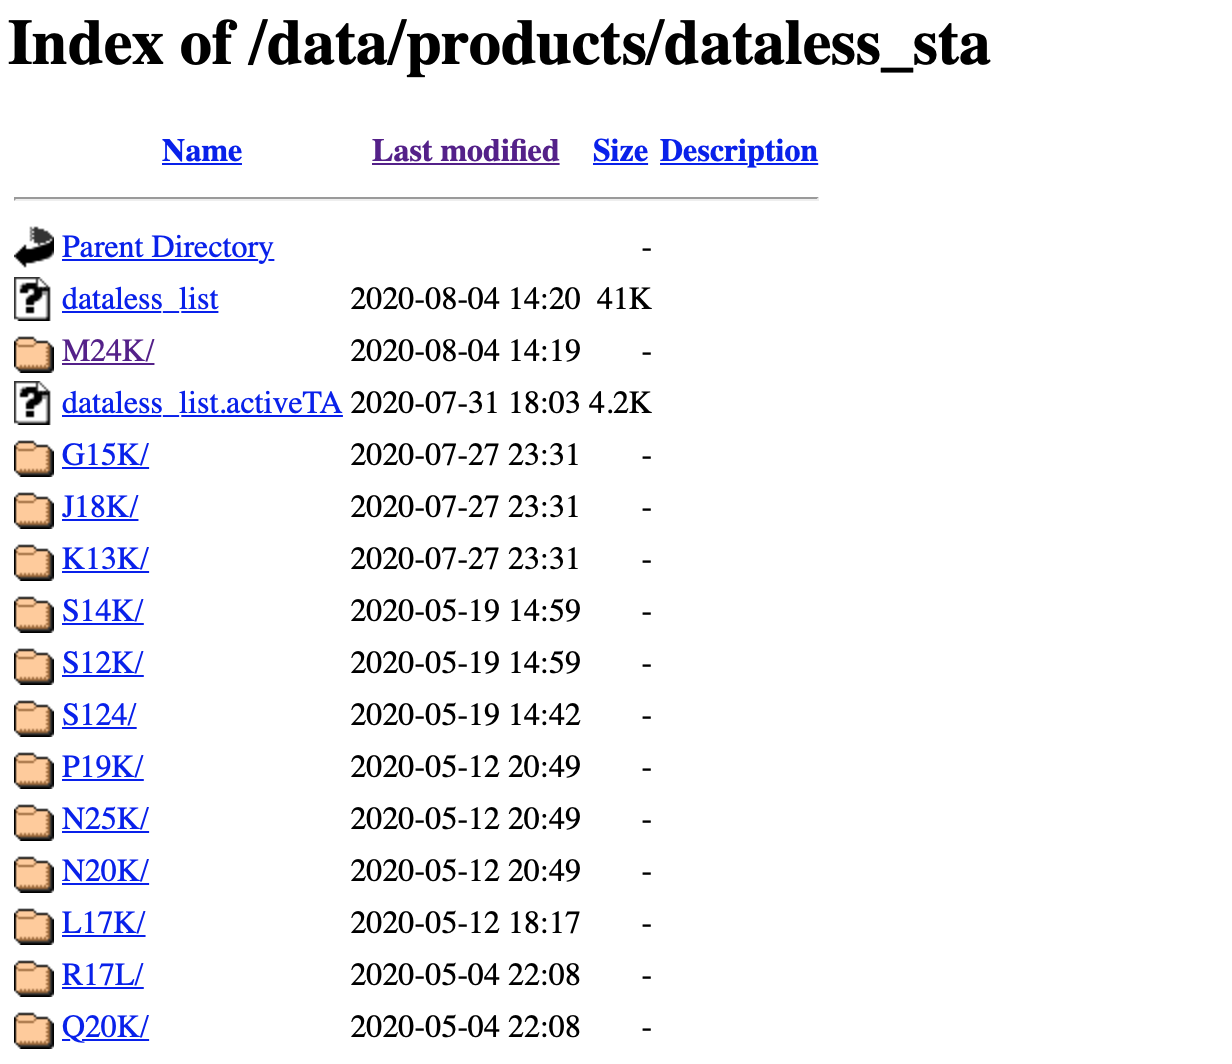 Directory listing of available dataless SEED metadata files for download